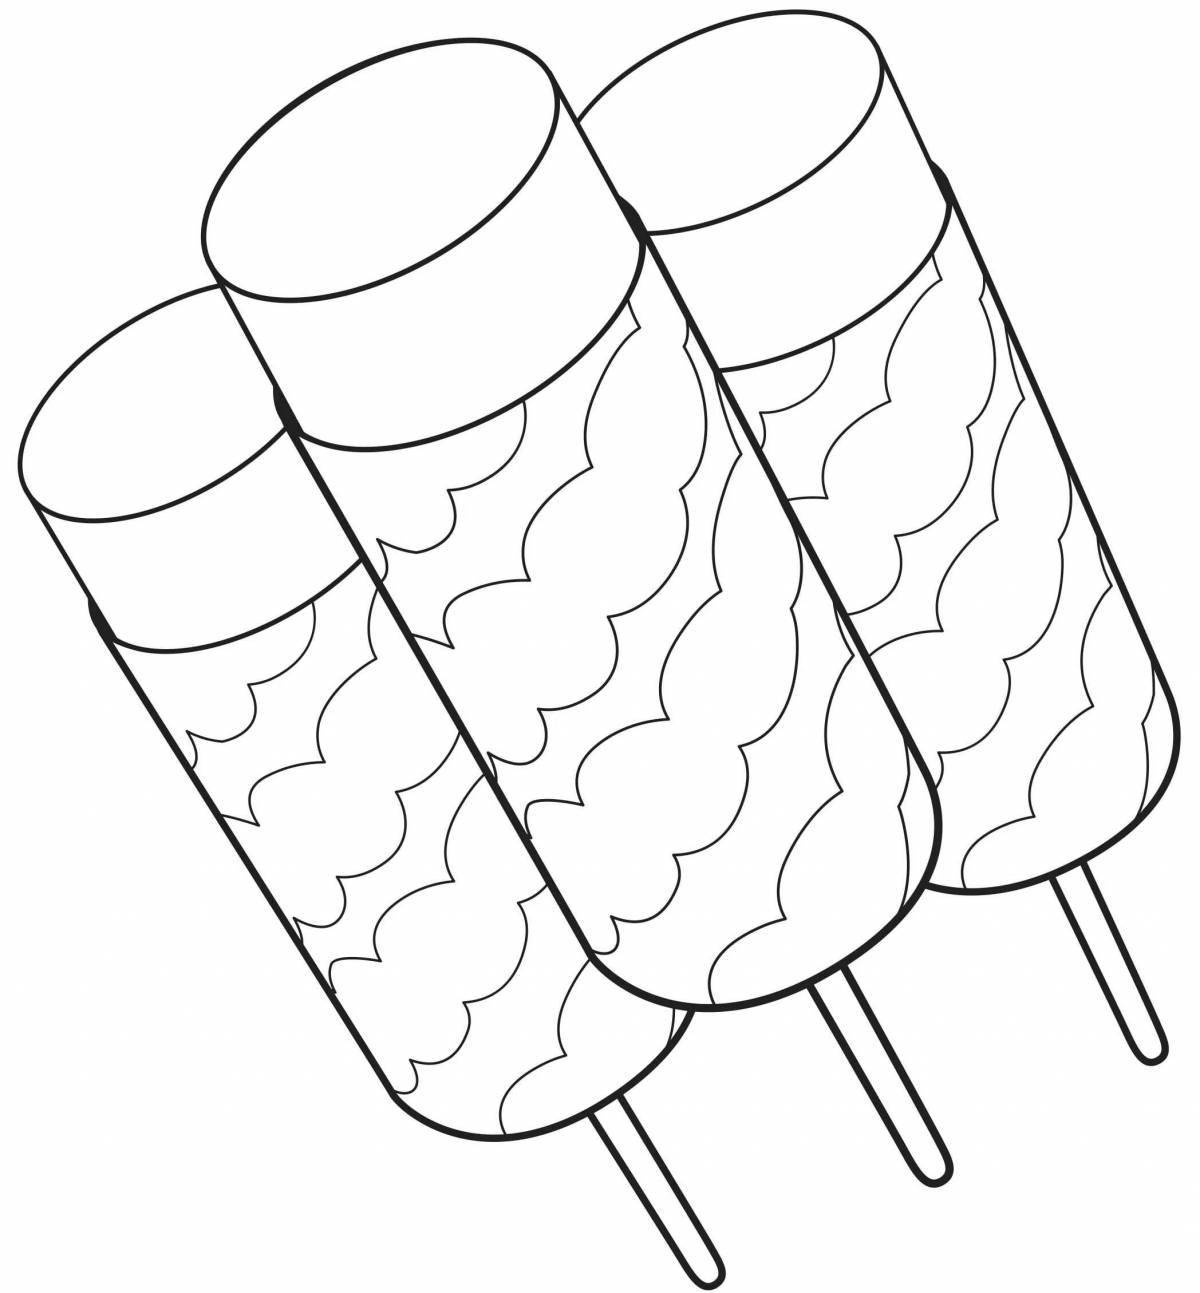 Playful popsicle coloring page